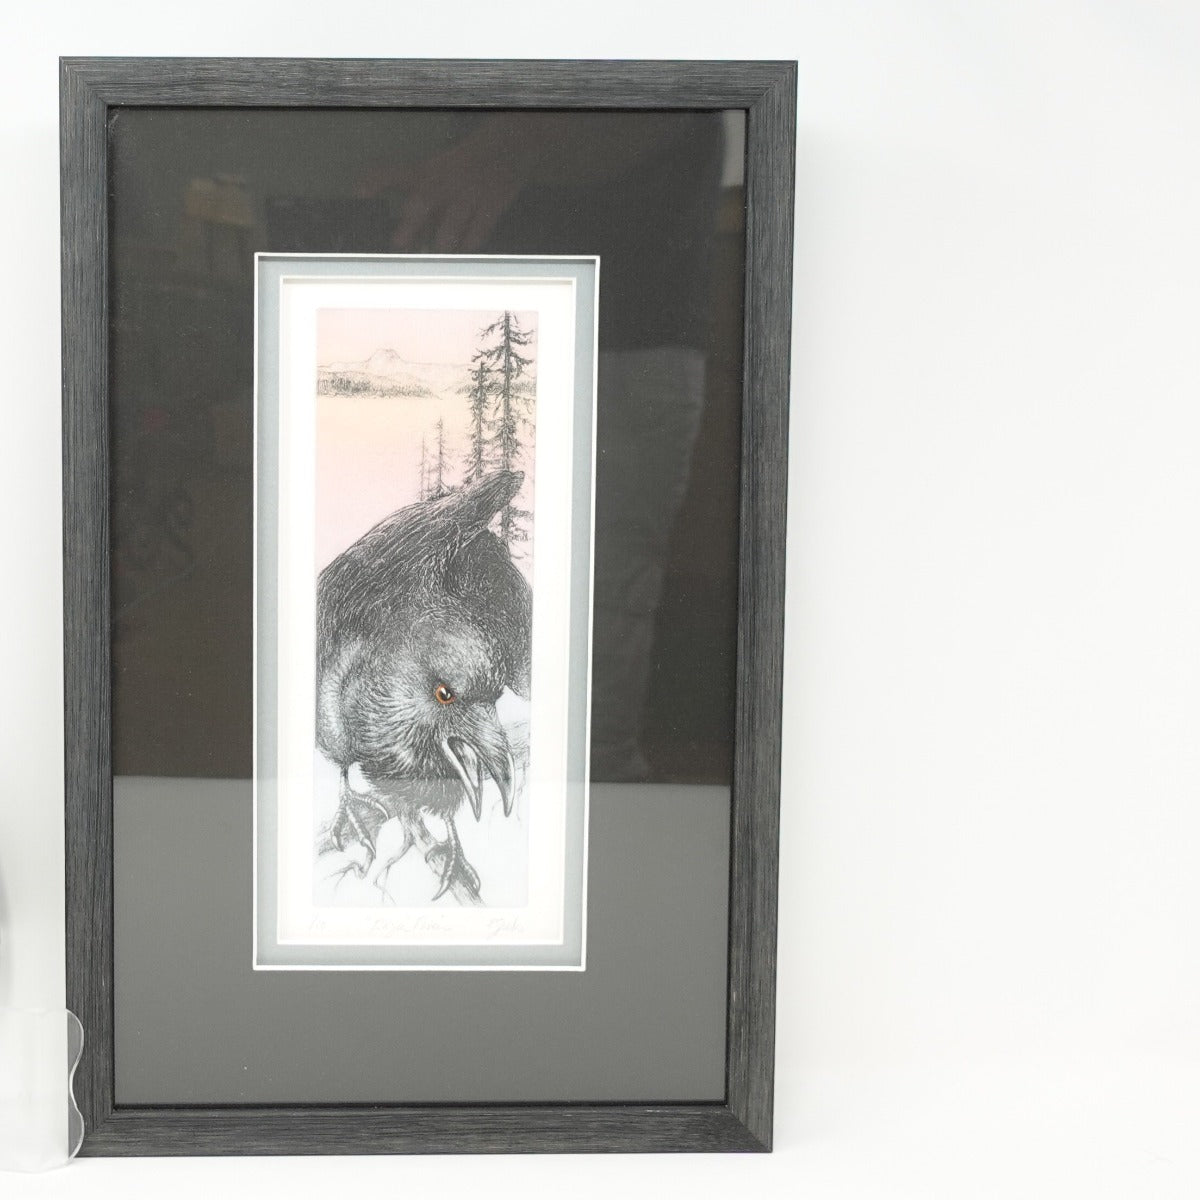 Perrin Sparks Portraits - etching - Ragin' Raven